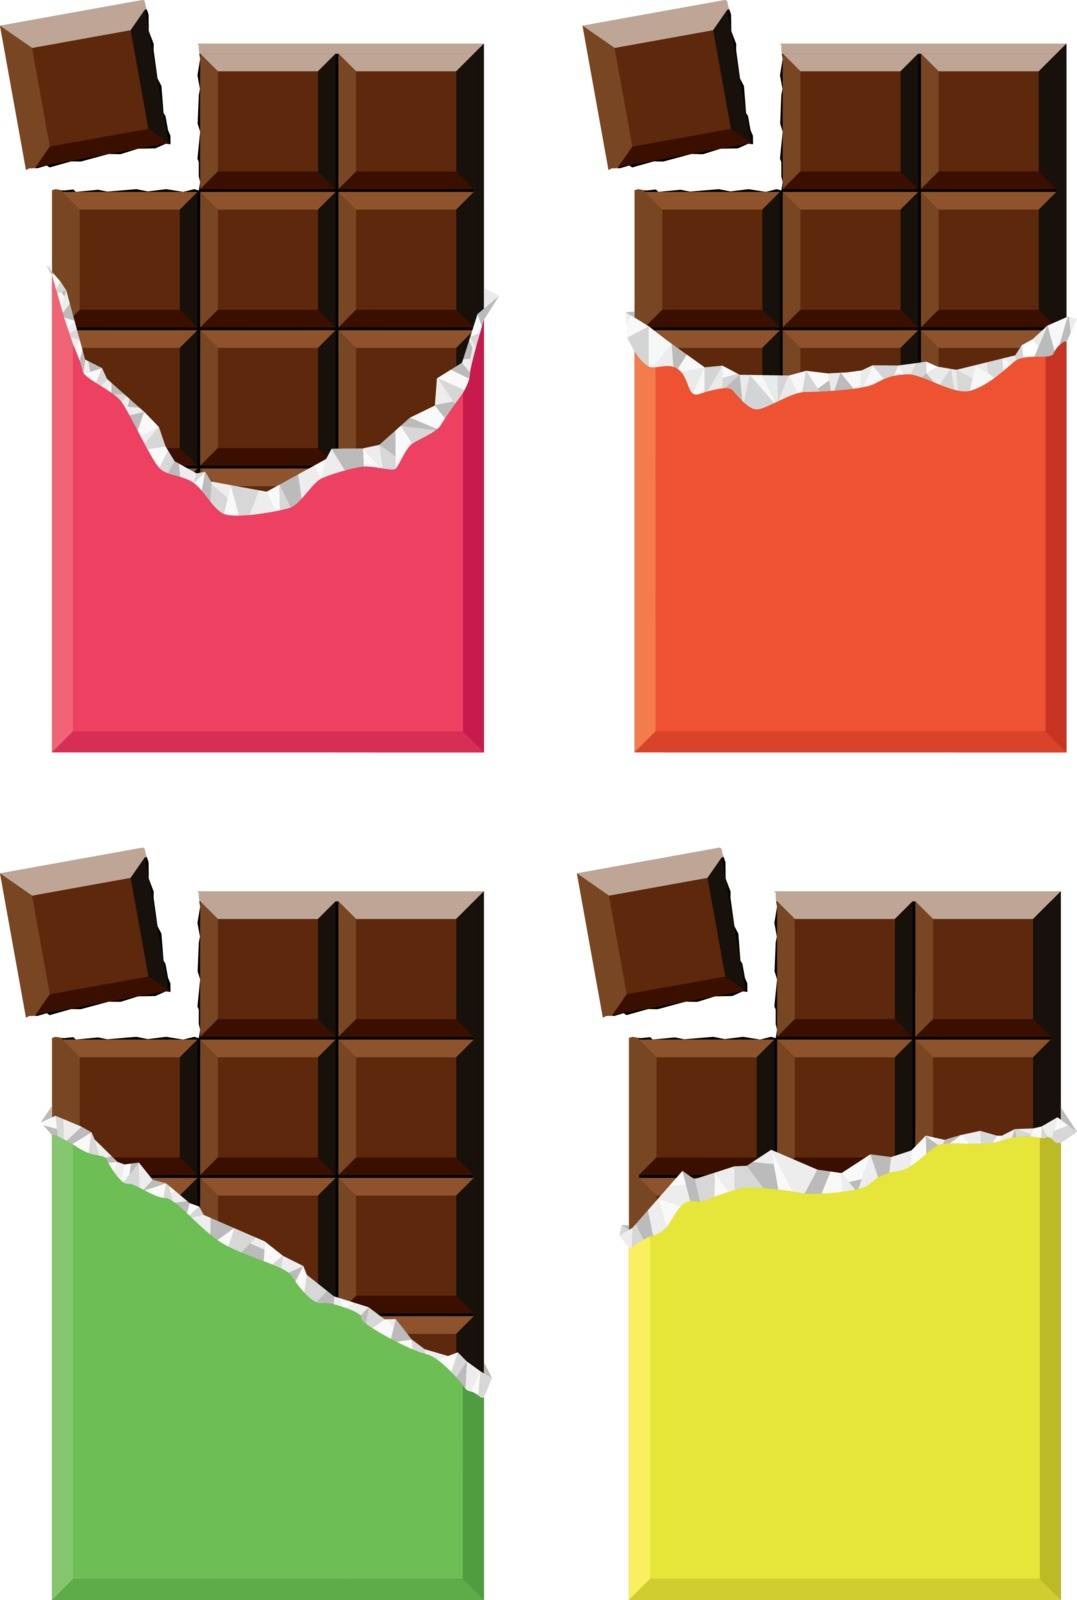 vector collection of chocolate bars